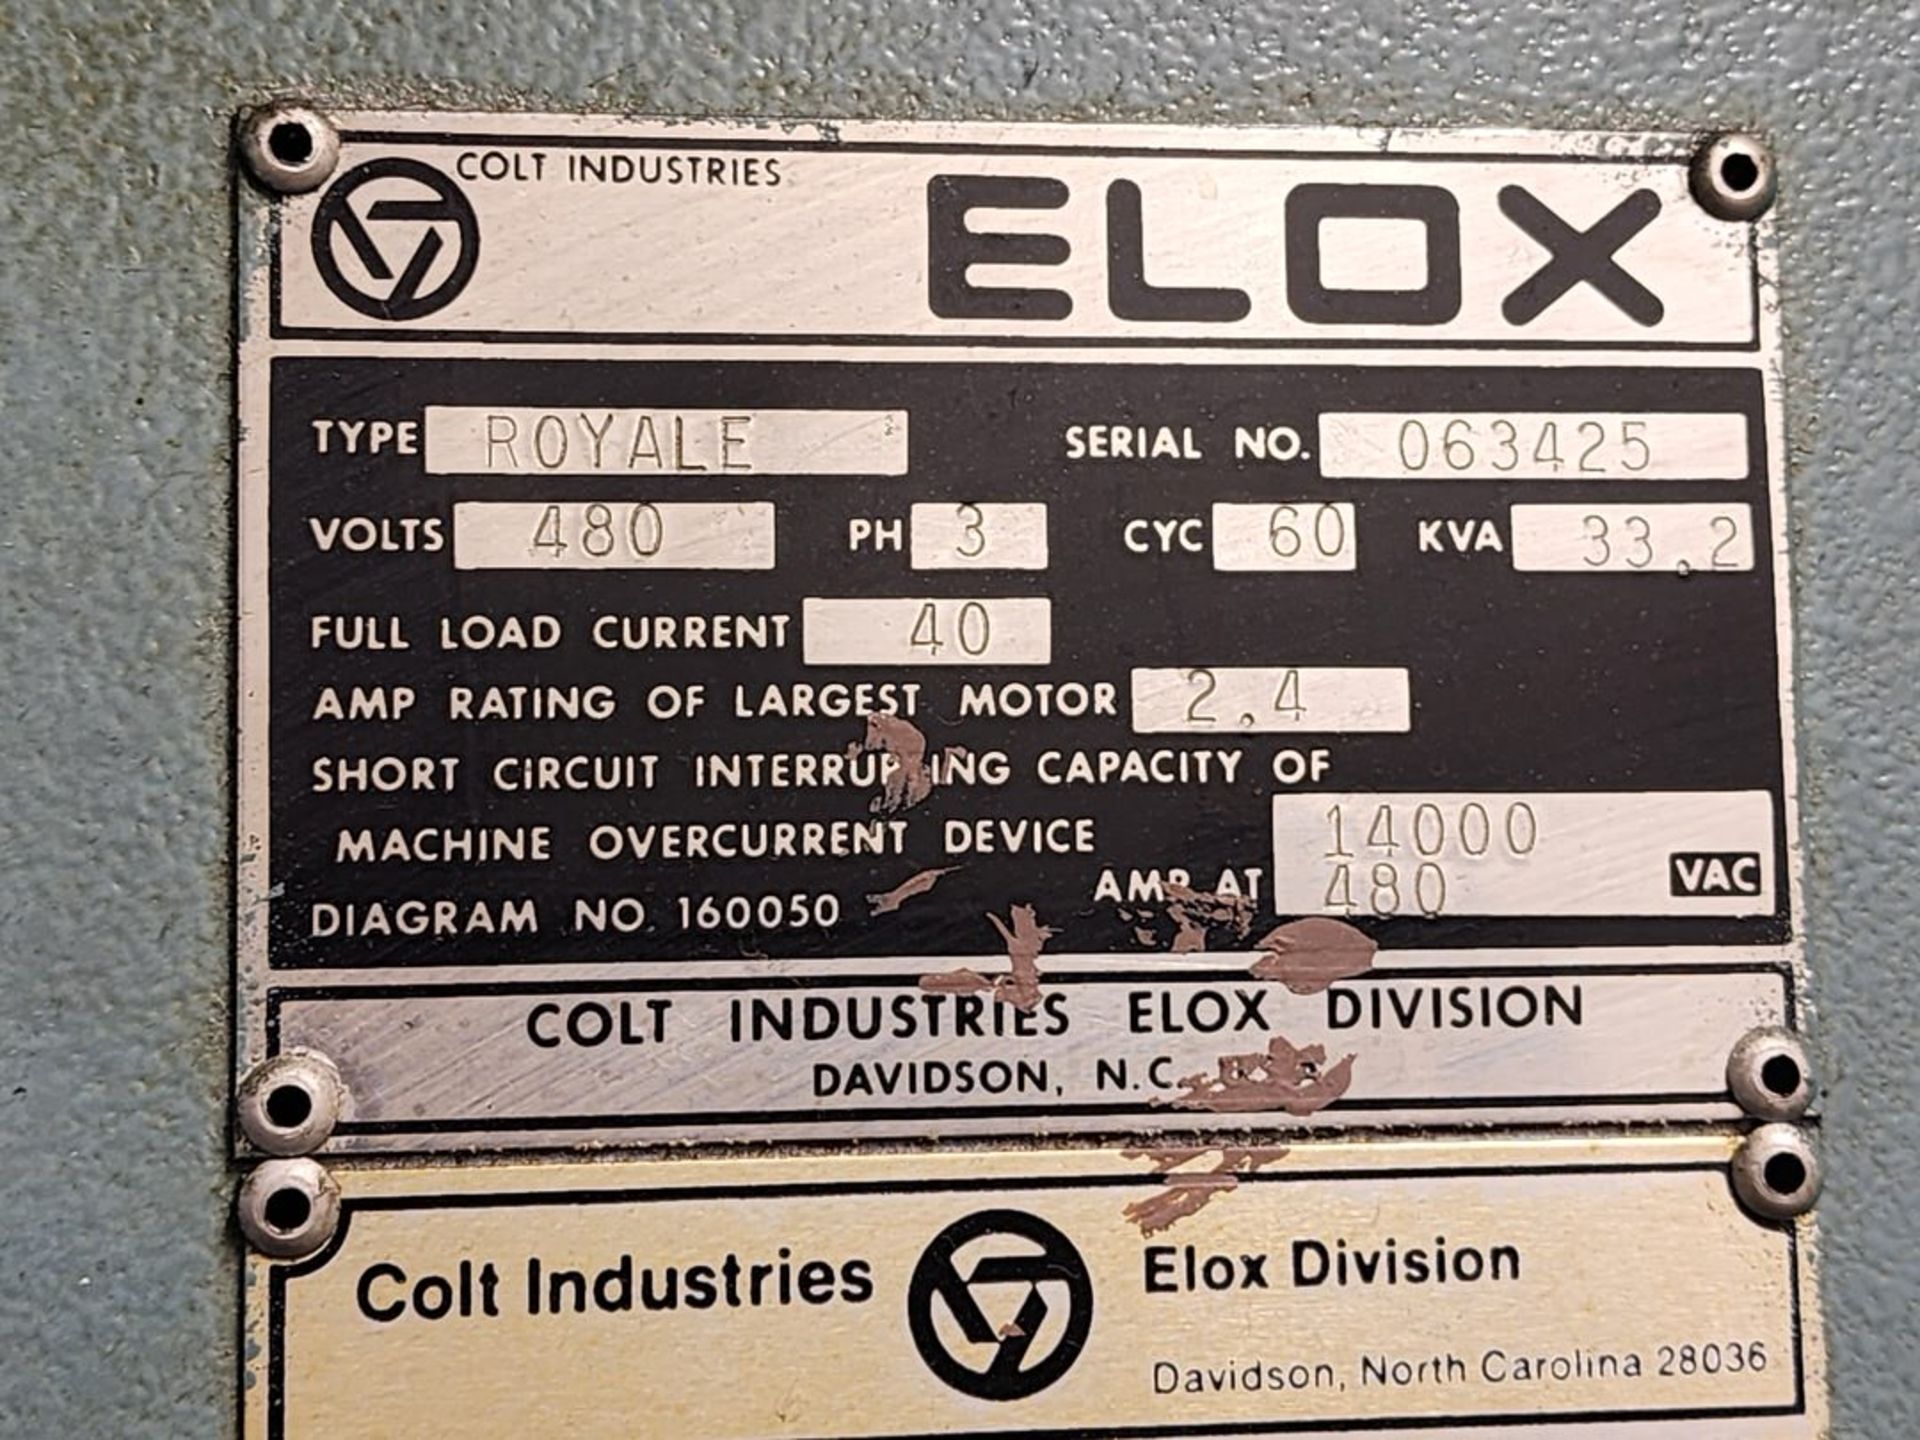 Elox Royale Edm Machine W/ Astra 100S Controller; W/ Digiset Controller (Asset# 1076722) - Image 21 of 21